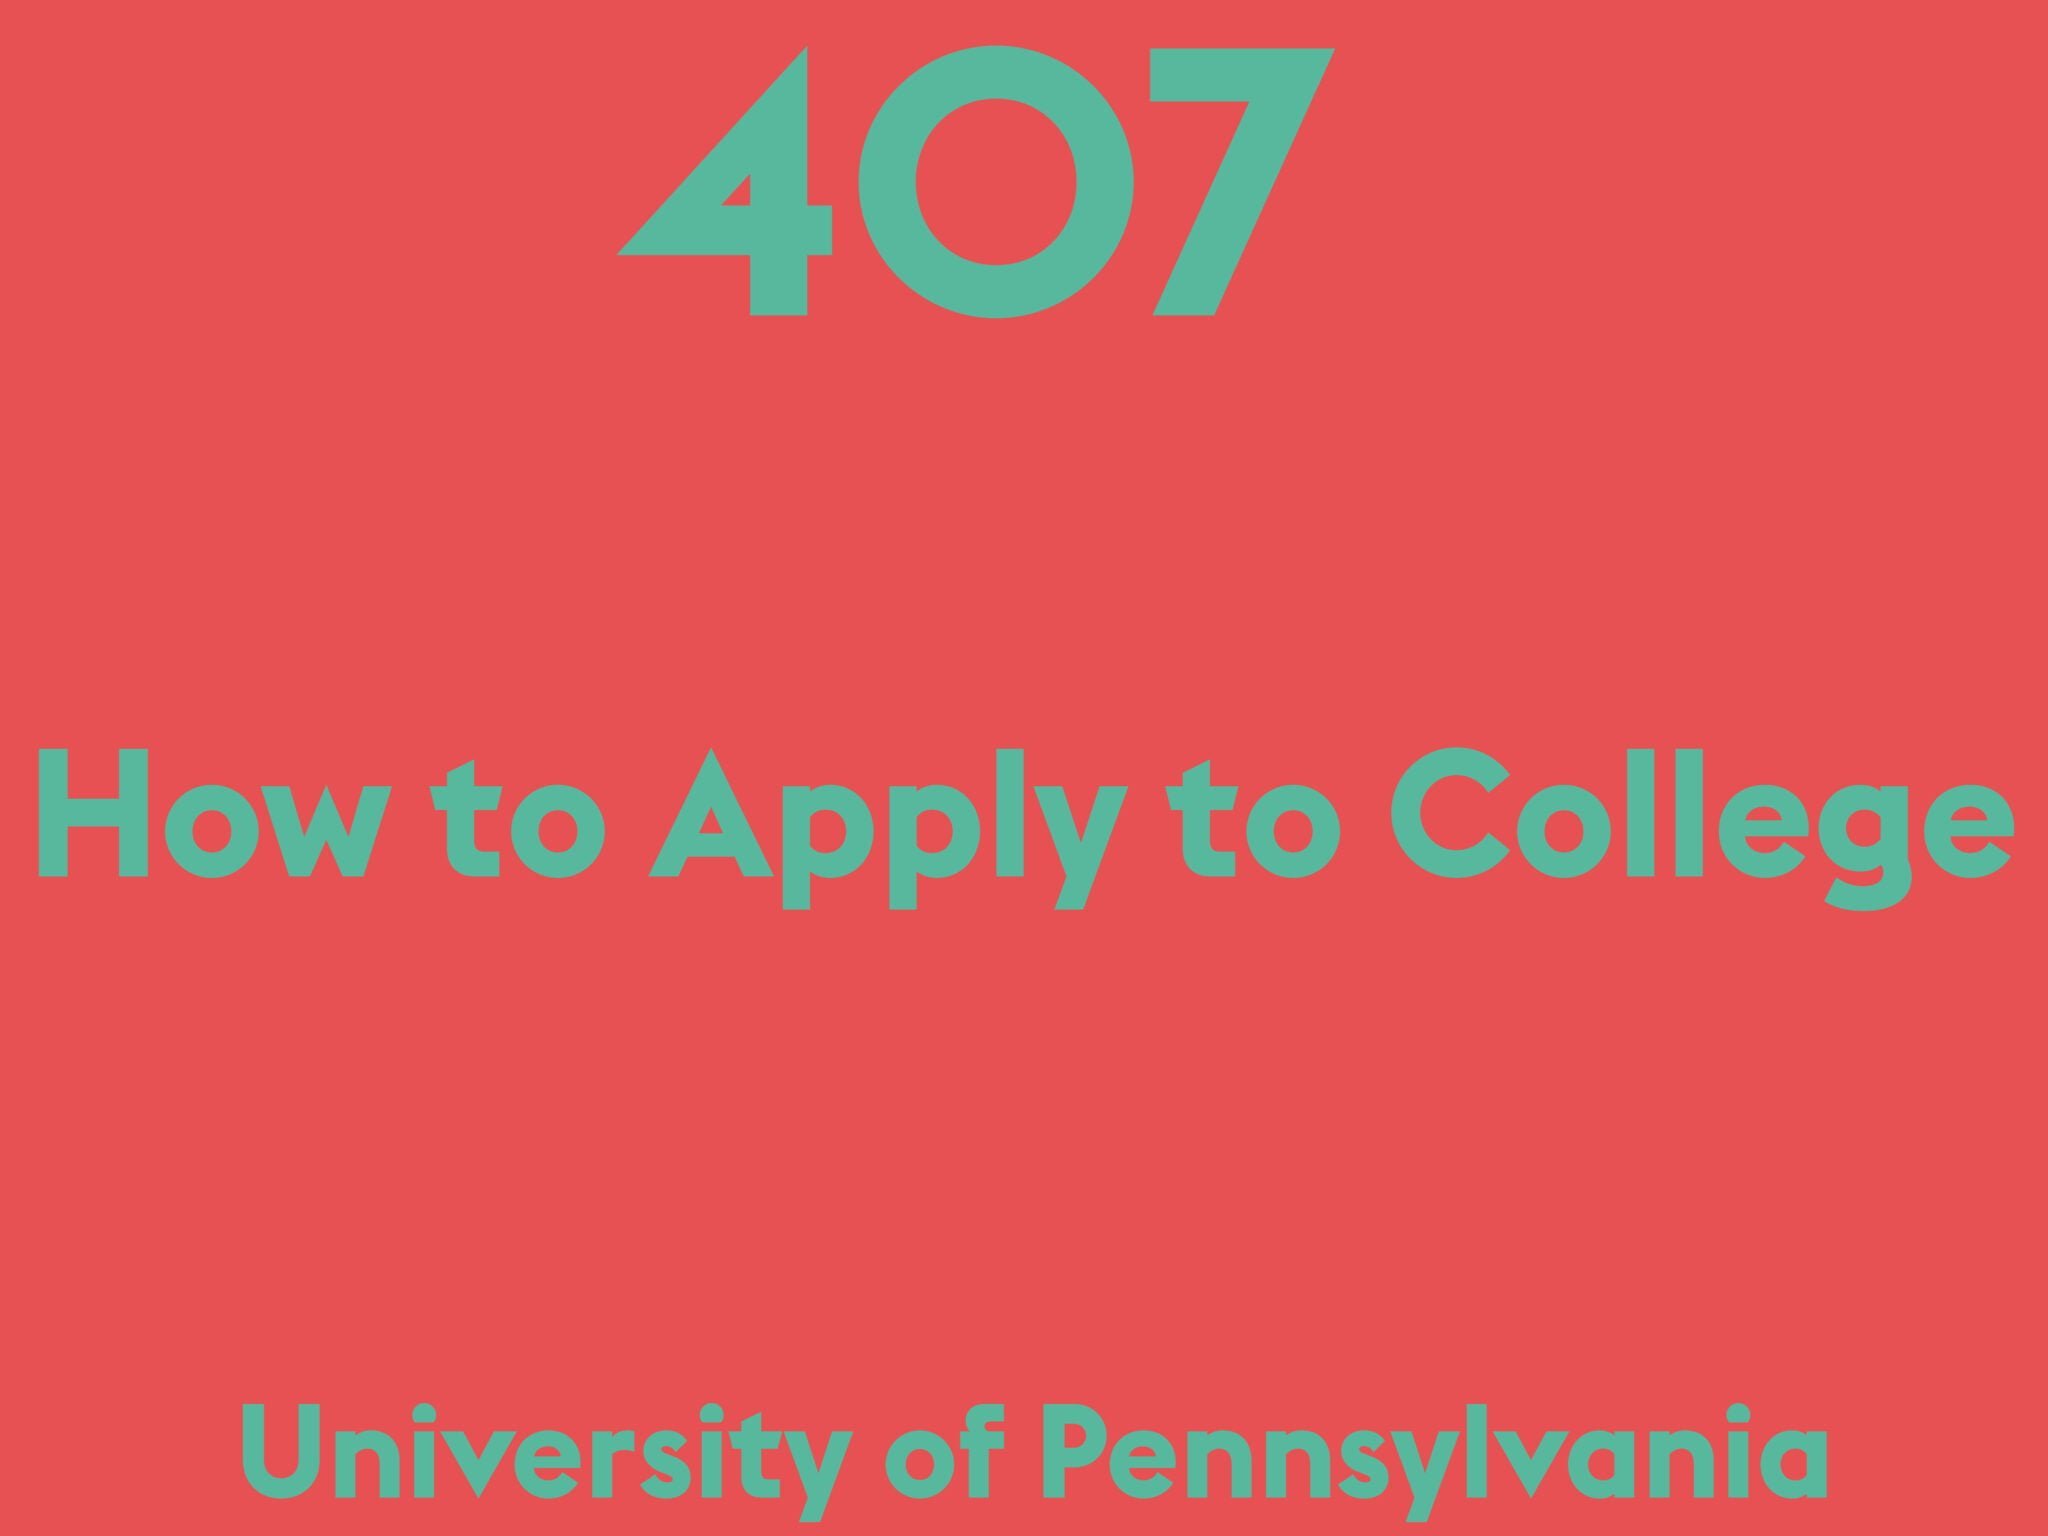 How to Apply to College